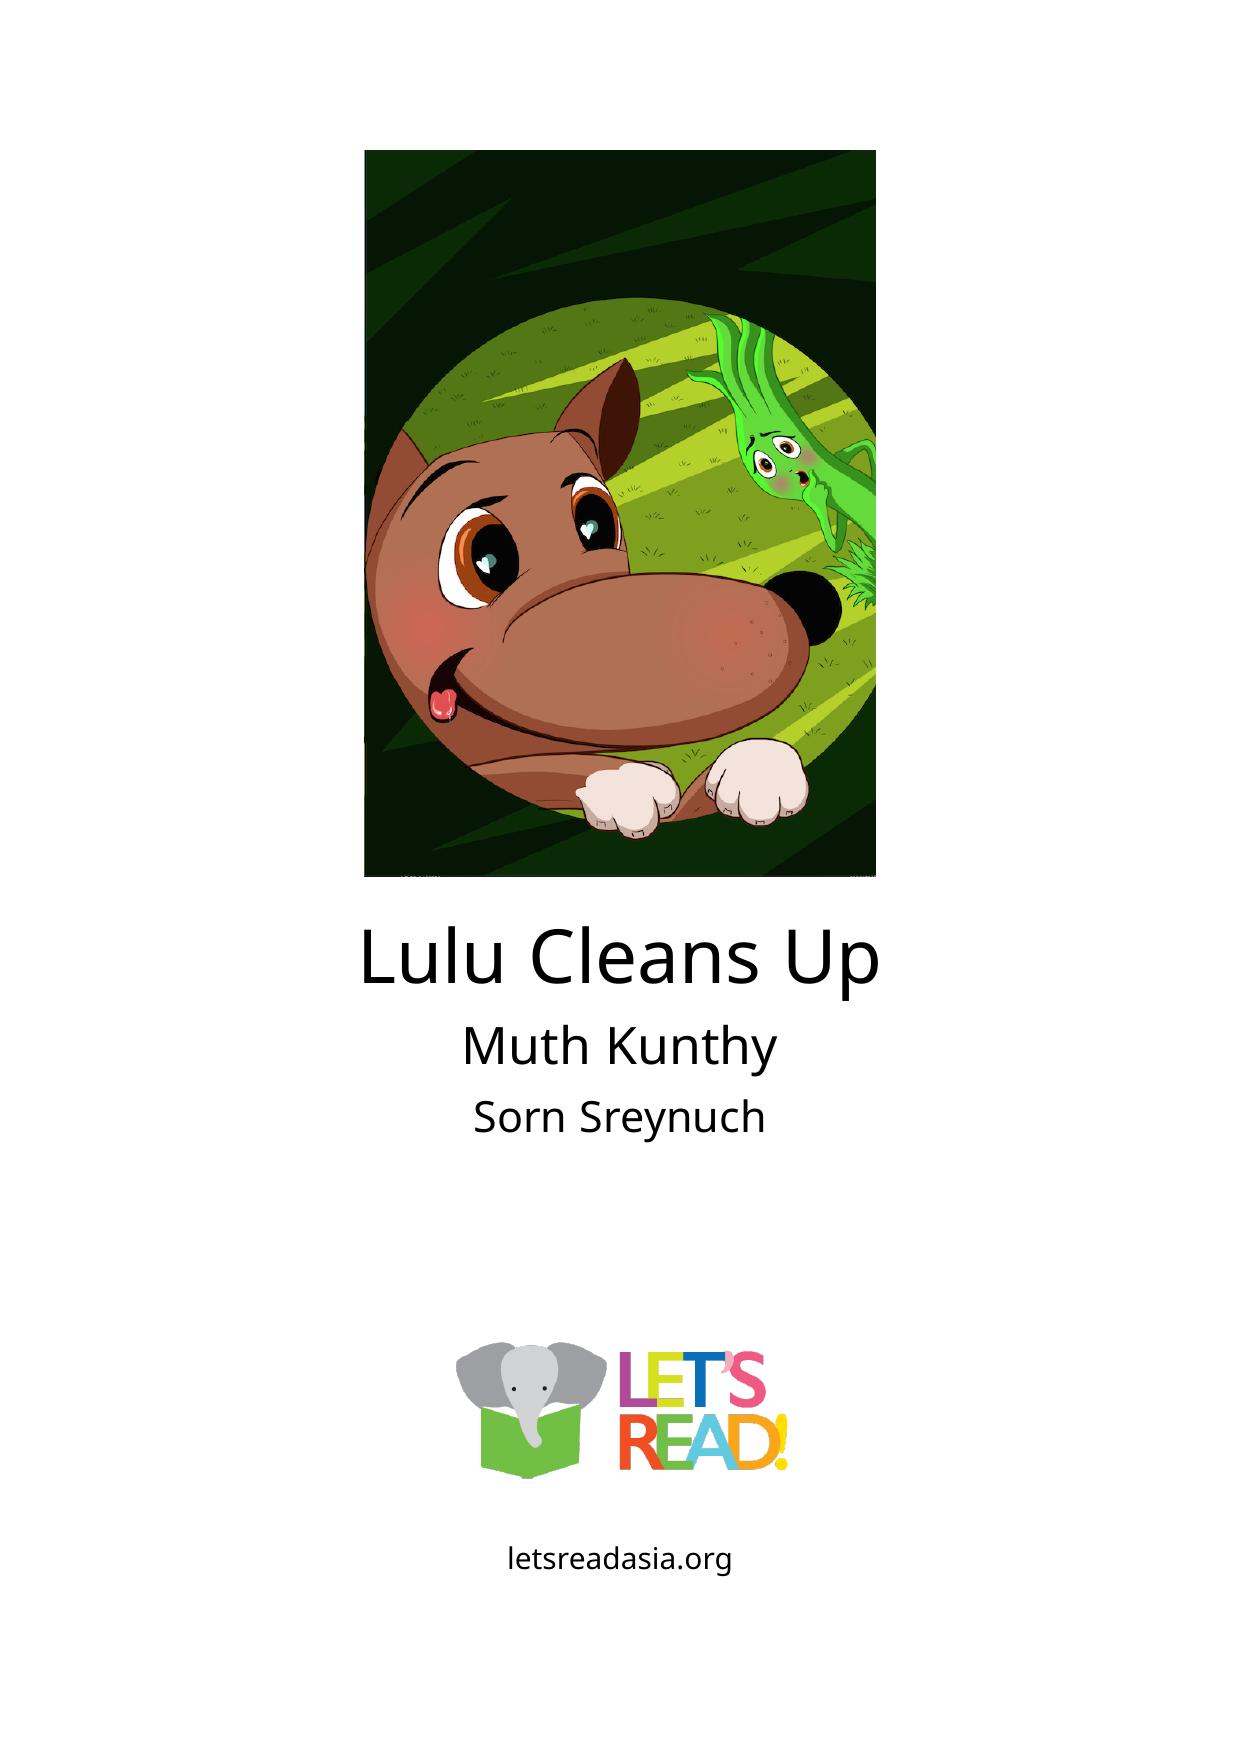 Lulu Cleans Up